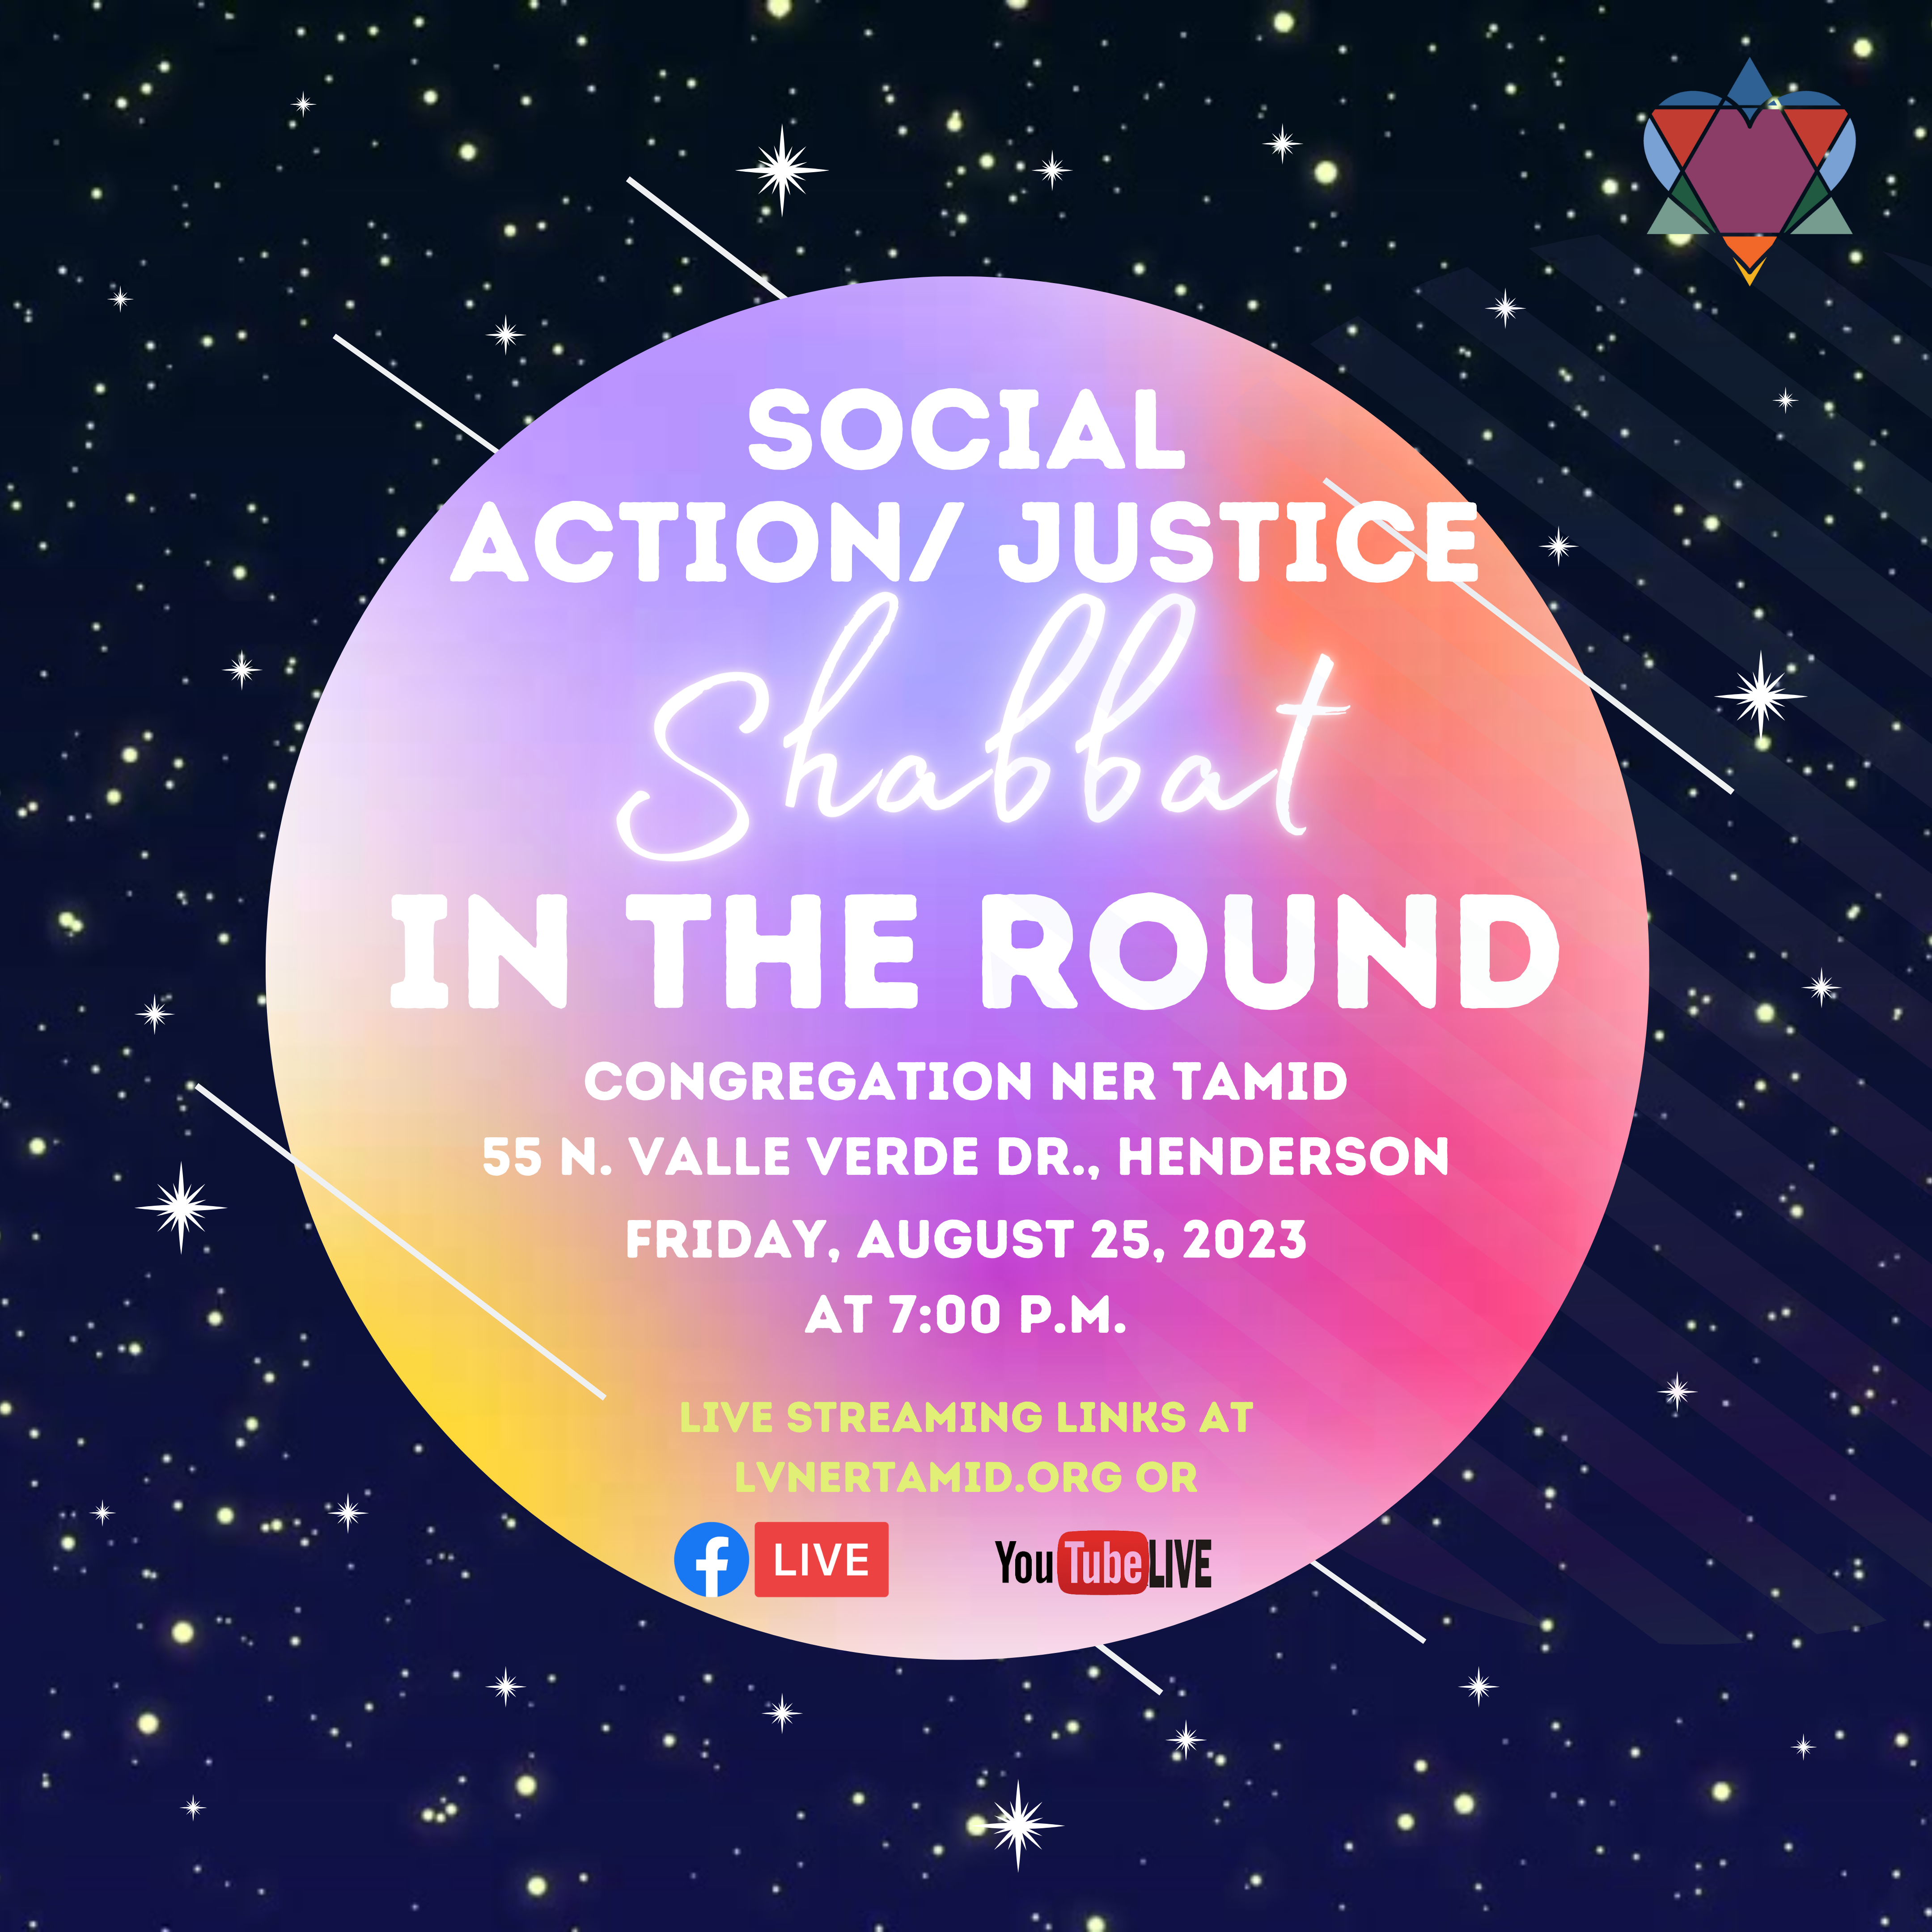 SOCIAL ACTION/ JUSTICE SHABBAT IN THE ROUND